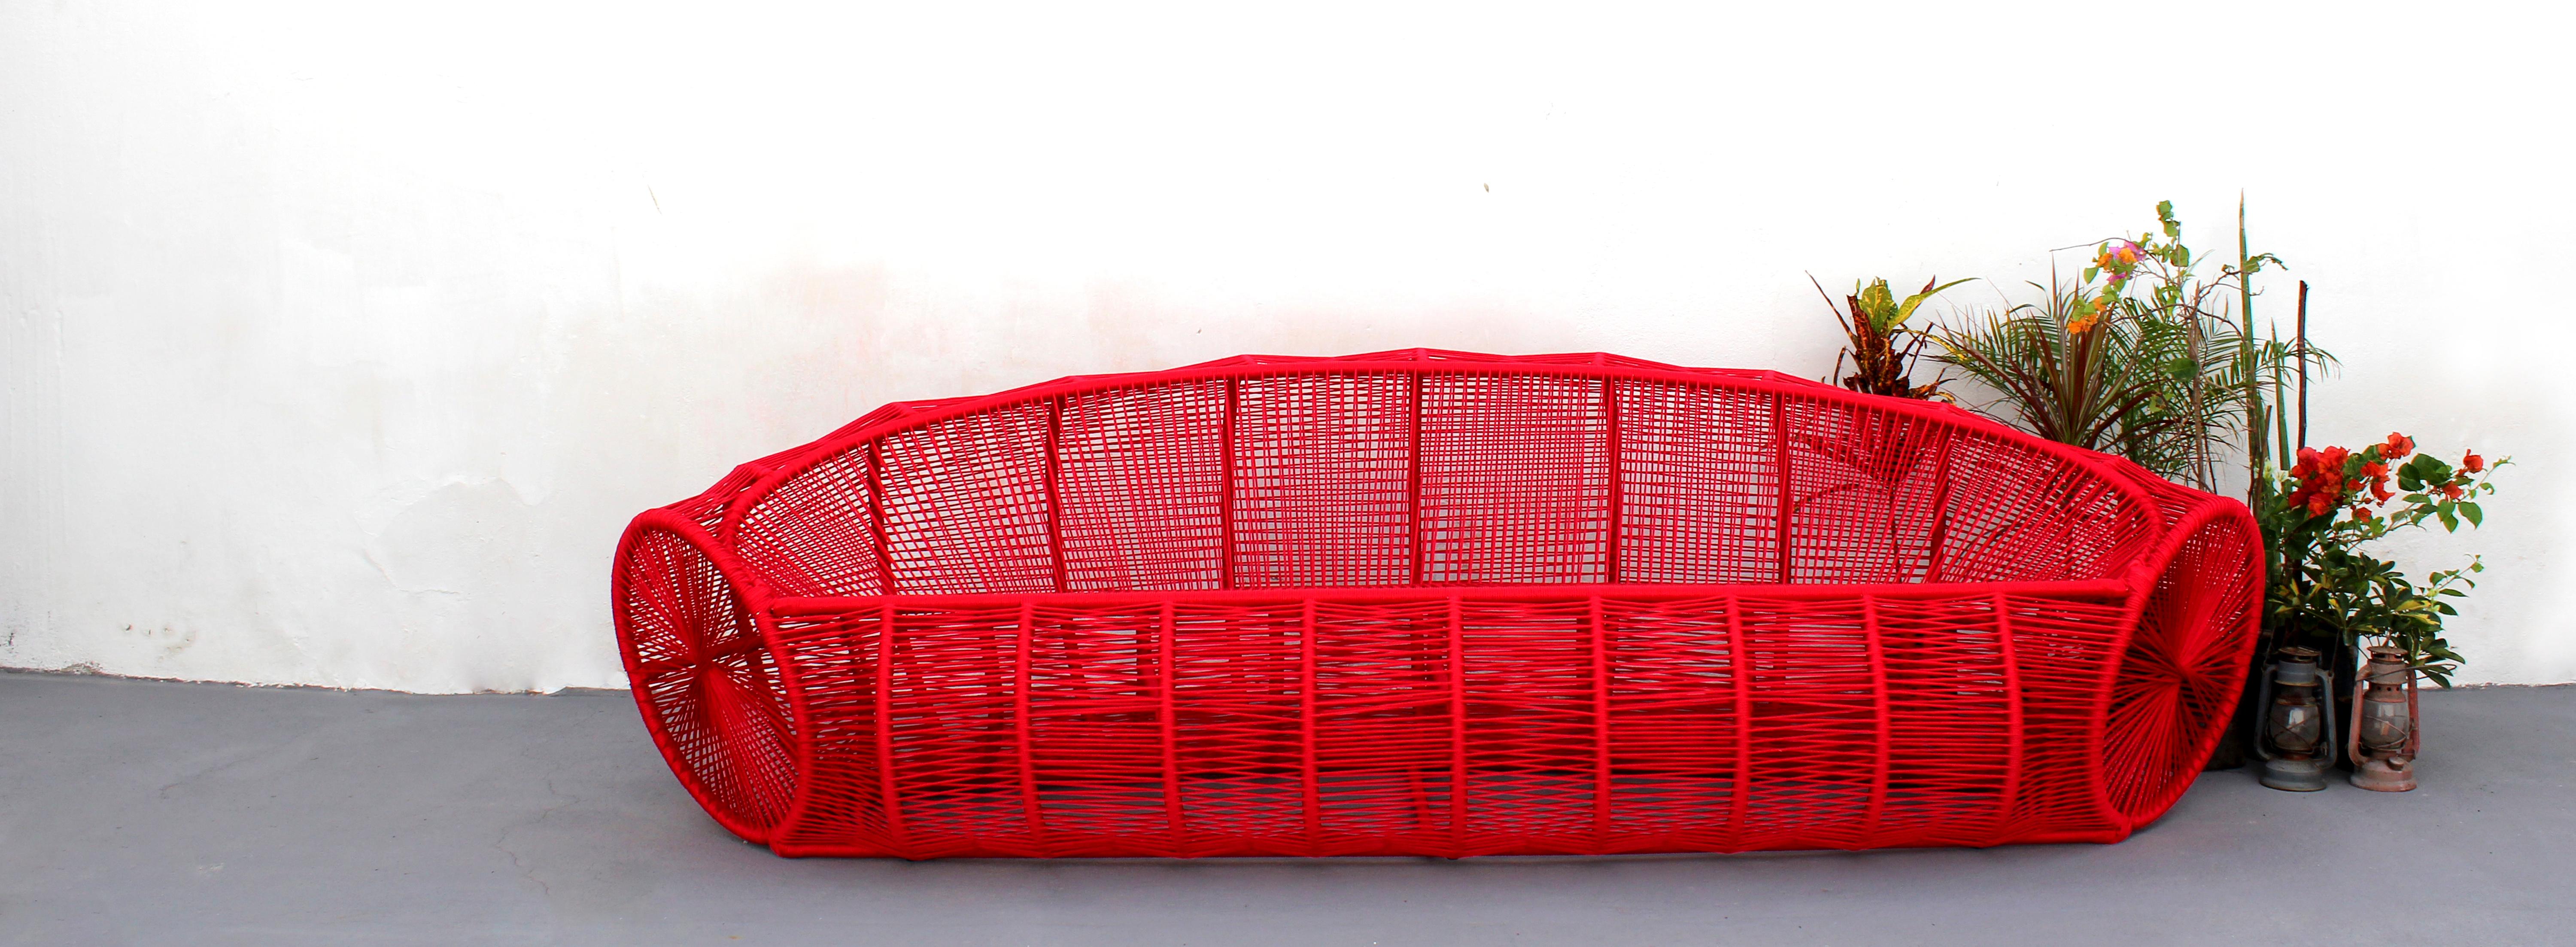 2-seat sofa for external and internal area.

Piece inspired in wicker or liana basket that serves to carry
groceries and is transported by pack animals at the countryside of the Brazilian Northeast.
  